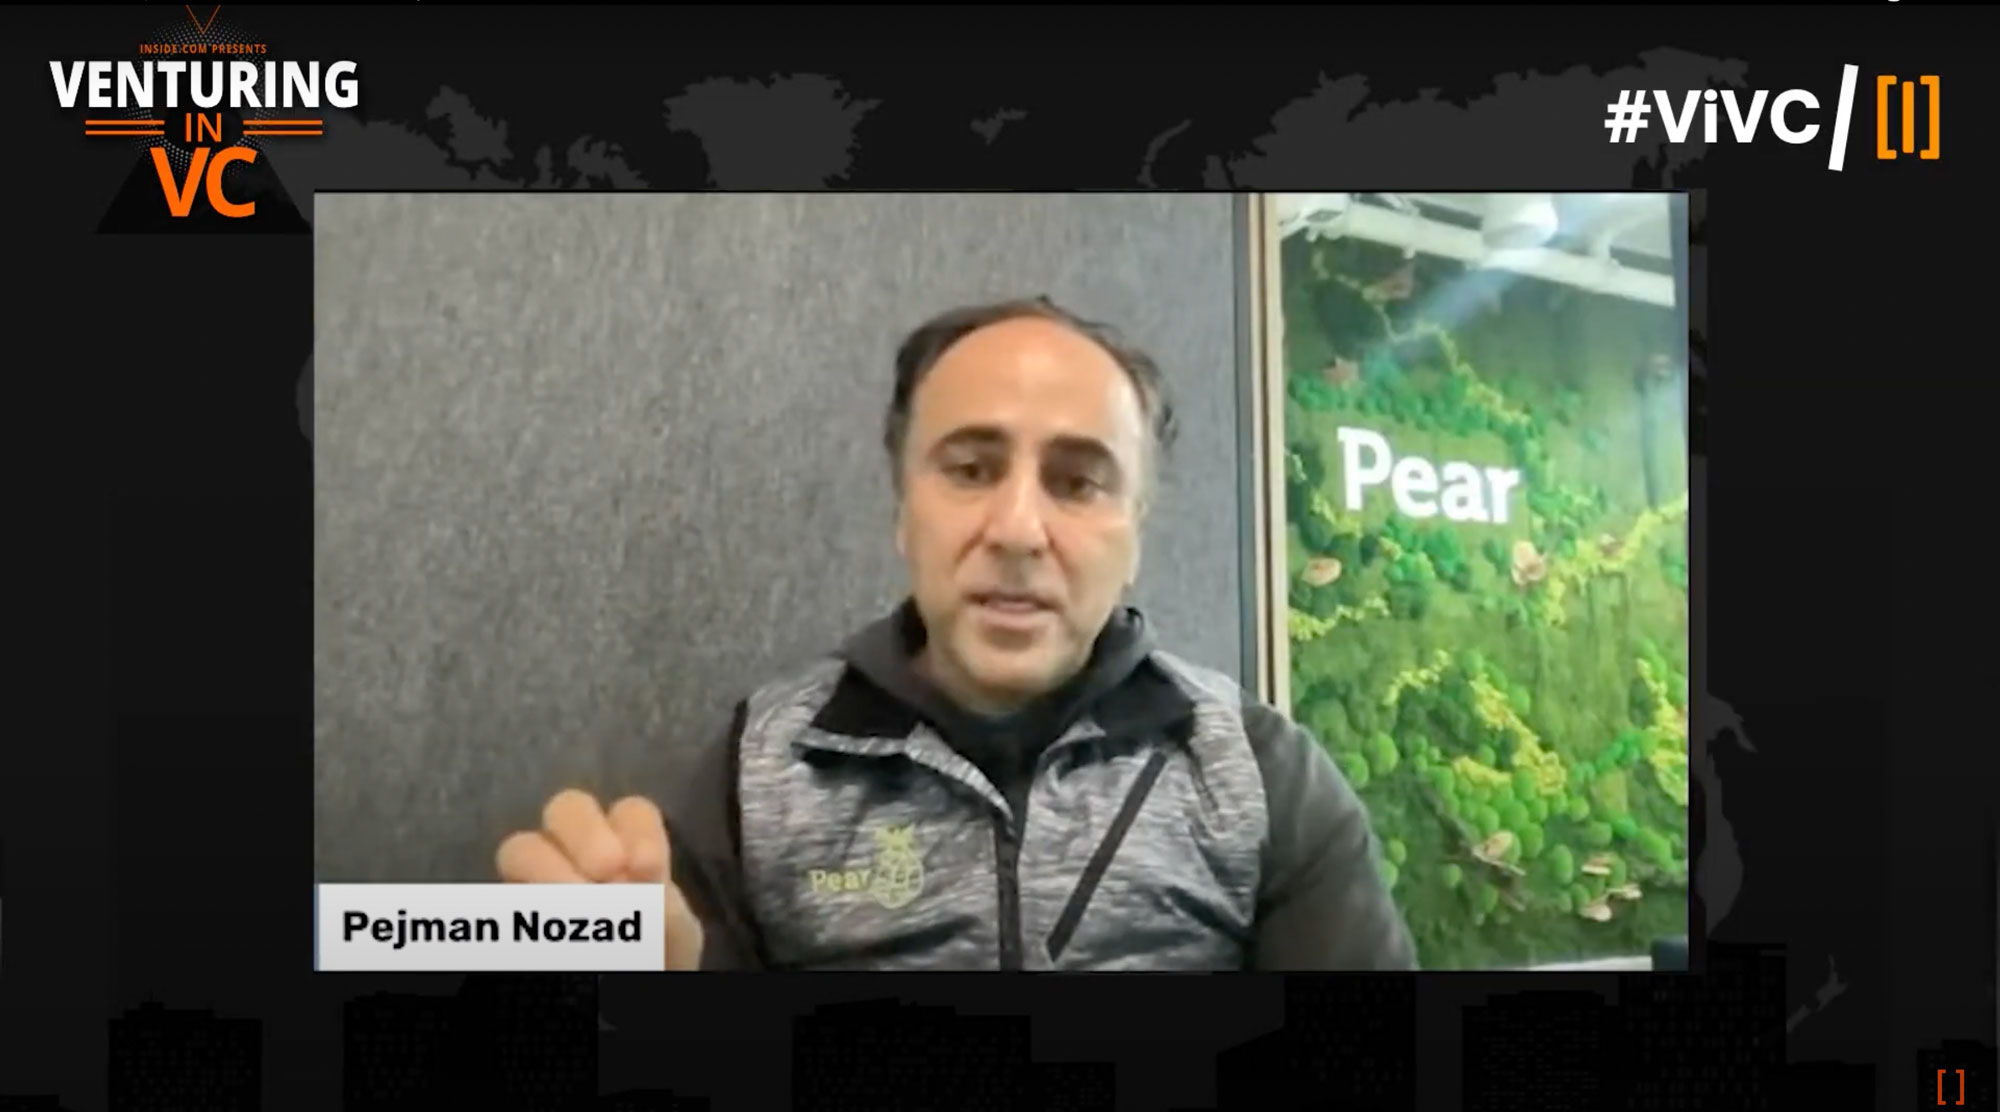 resources From Rugs to Riches with Pejman Nozad from Pear.VC